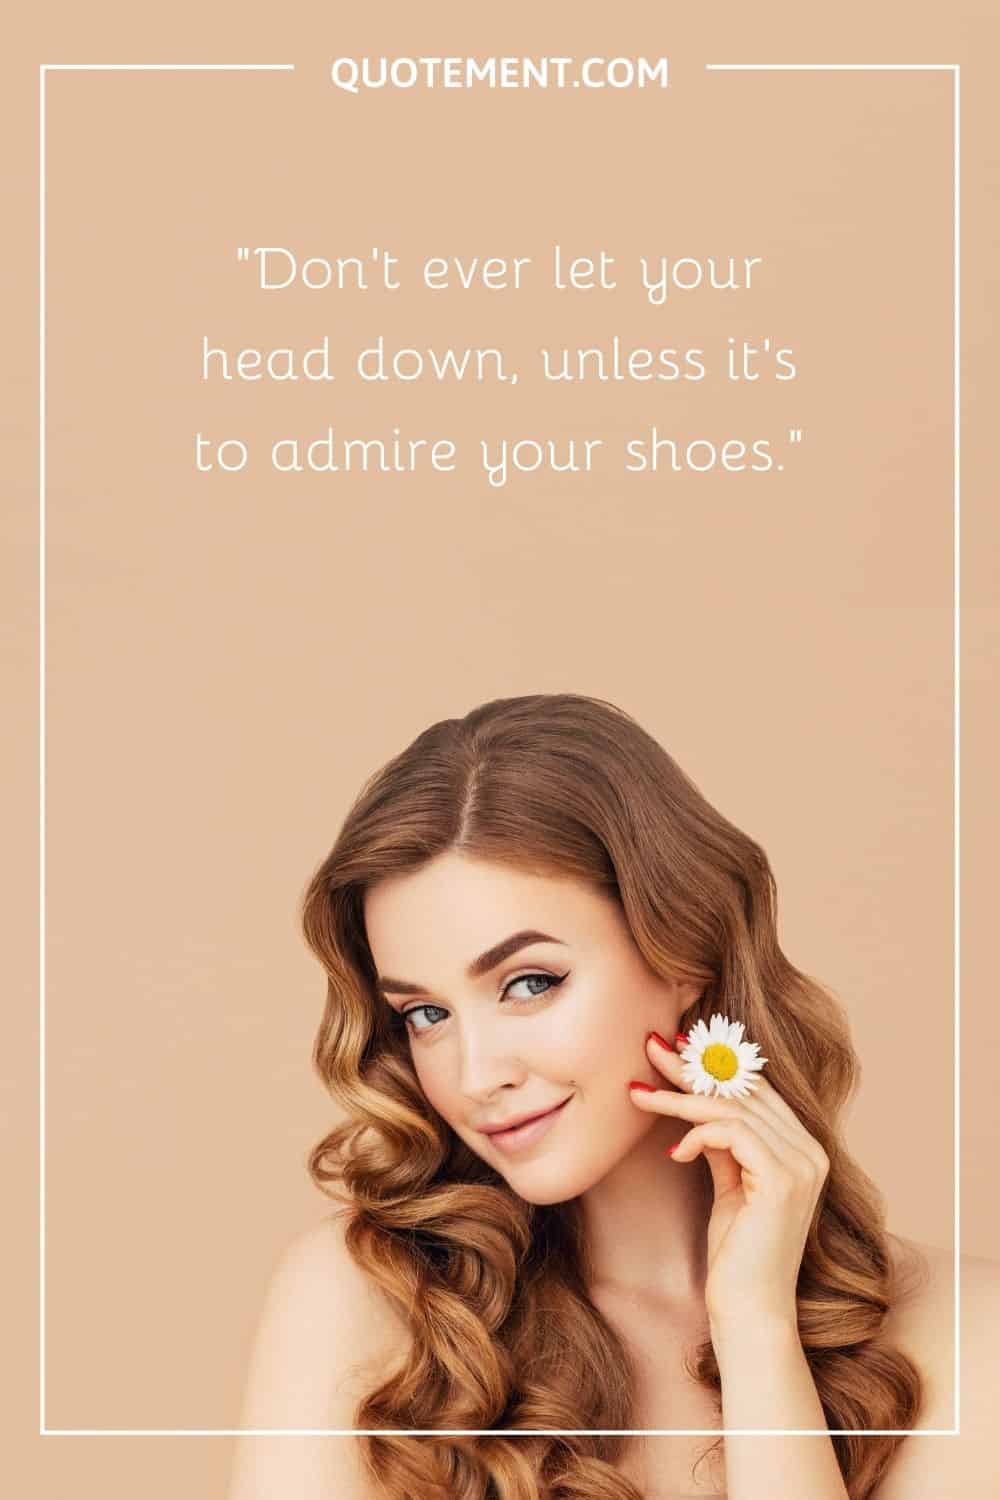 Don't ever let your head down, unless it's to admire your shoes.